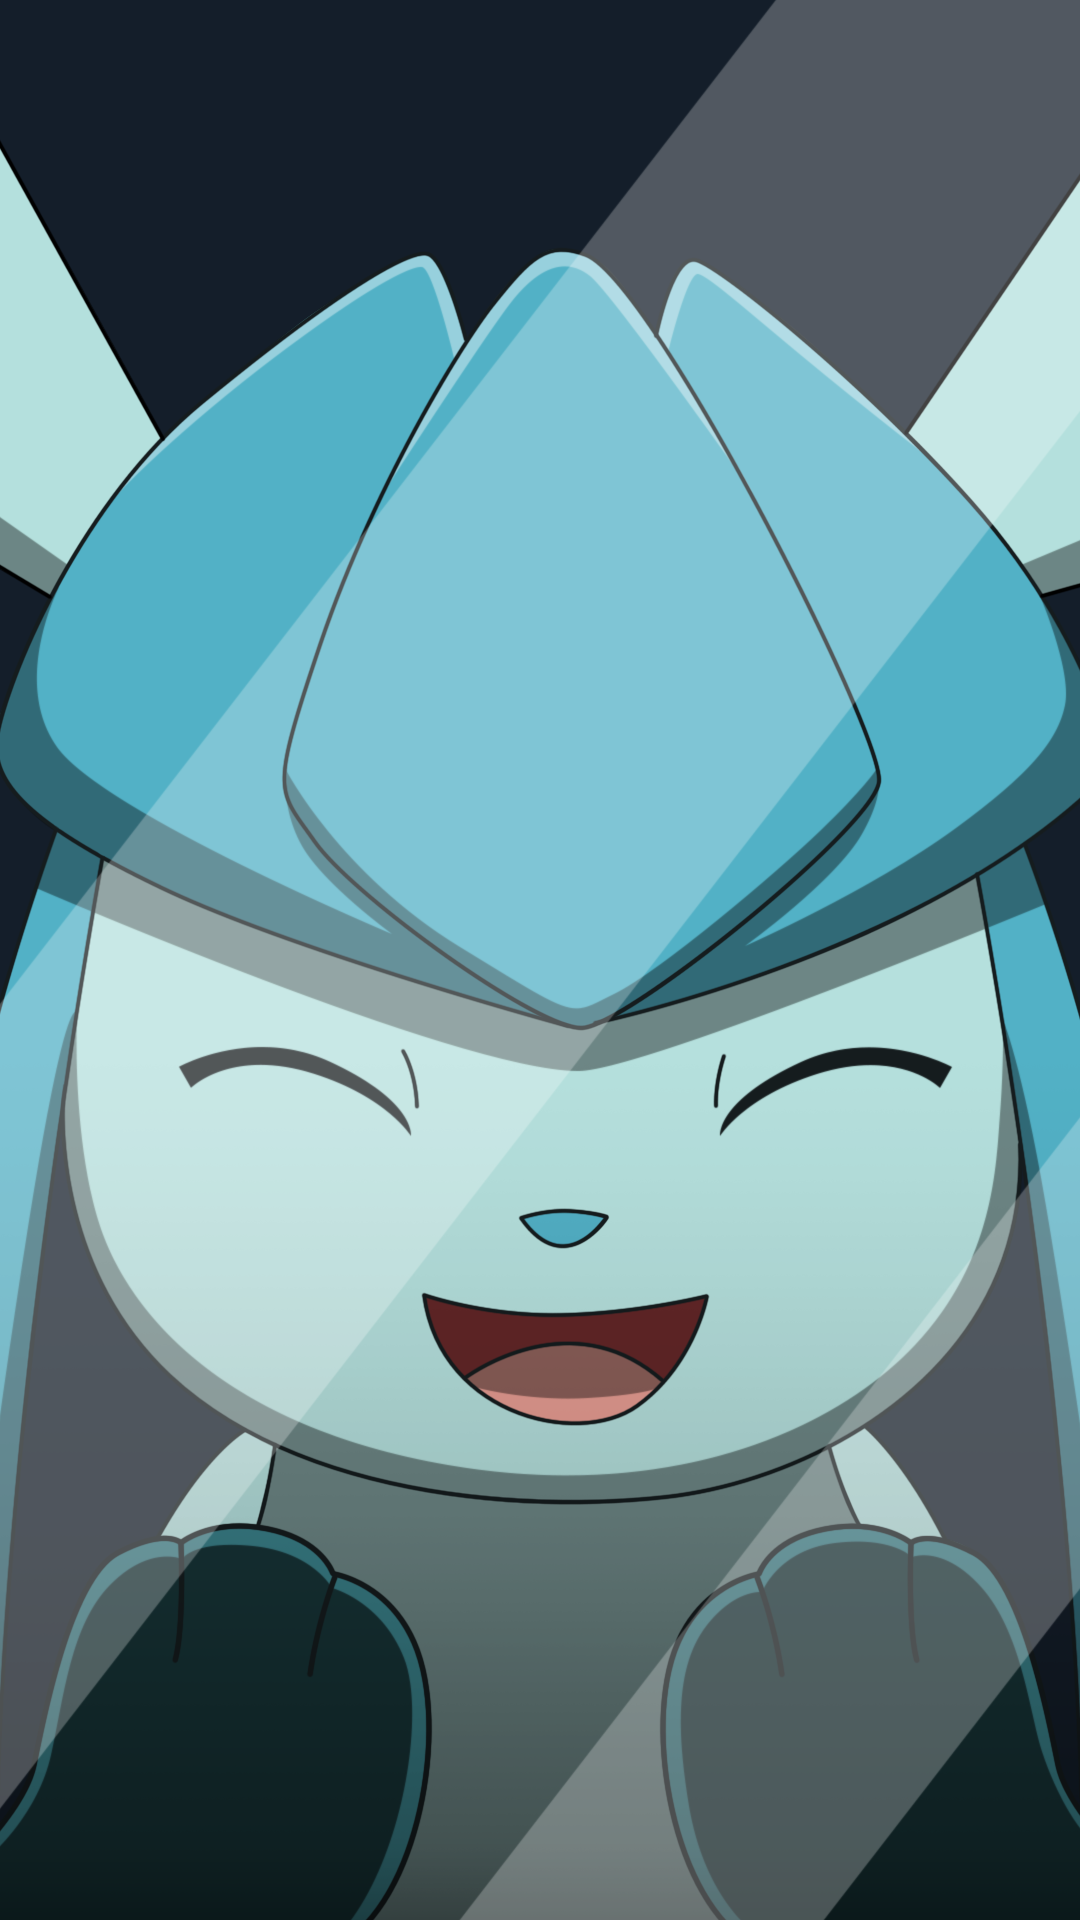 gift__glaceon_by_all0412_de68j95.png